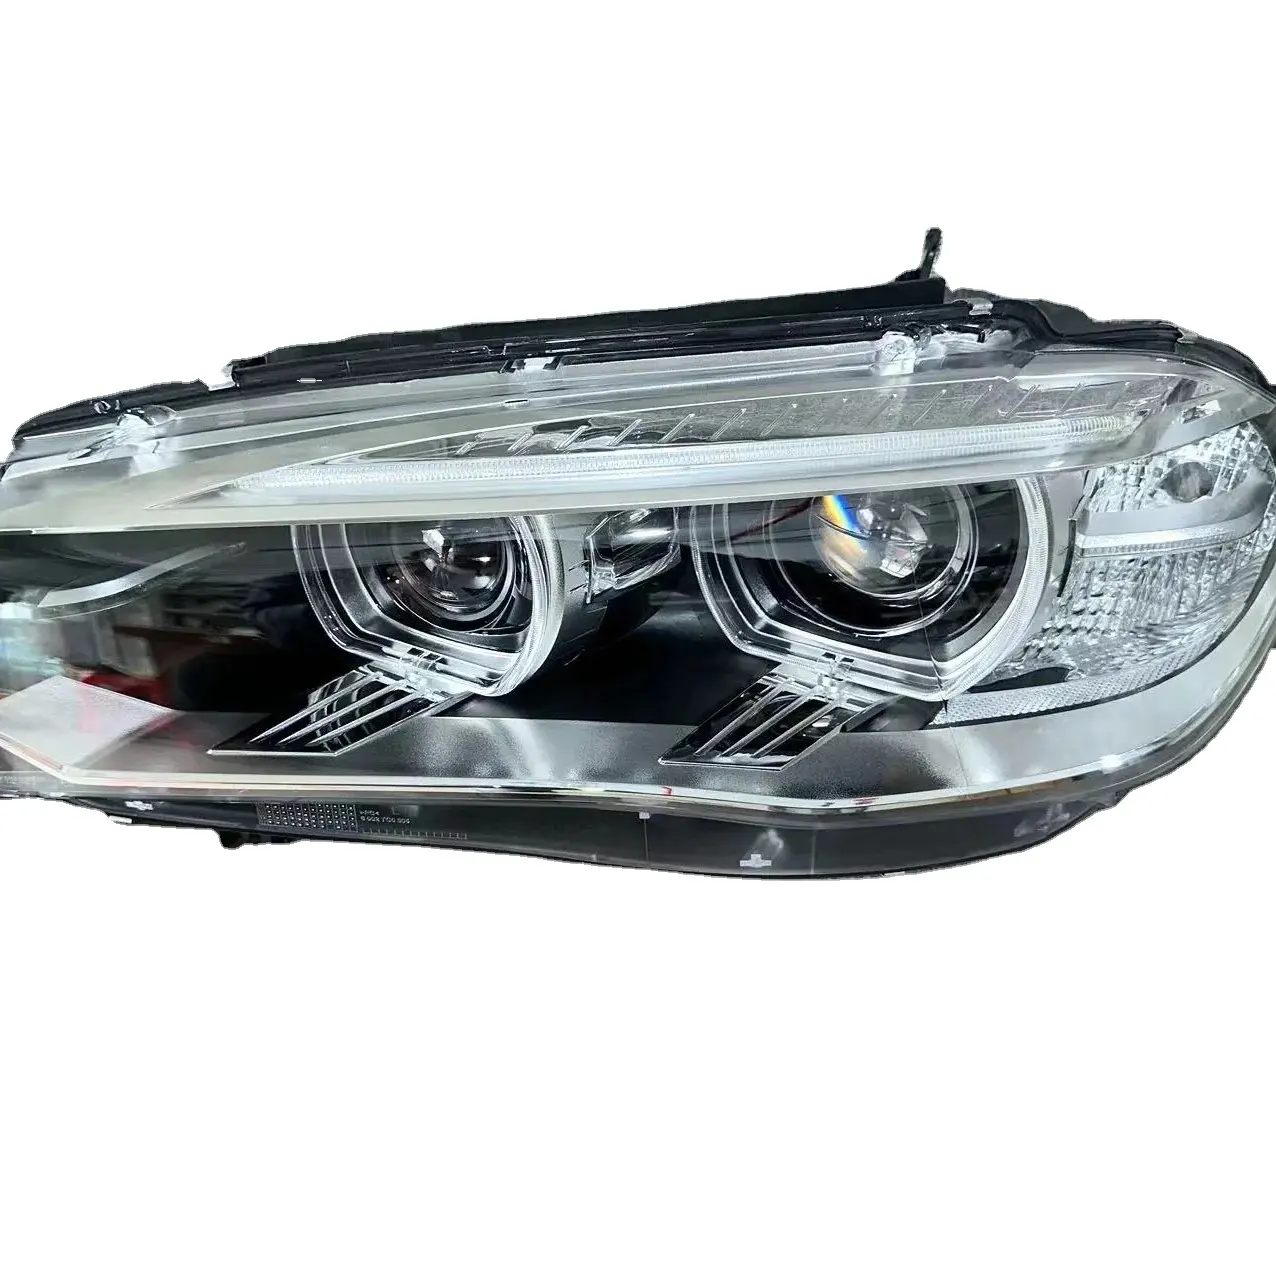 Hot selling products F15X6X5 European and American version of LED headlight lighting fixtures are suitable for BMW 63117317109